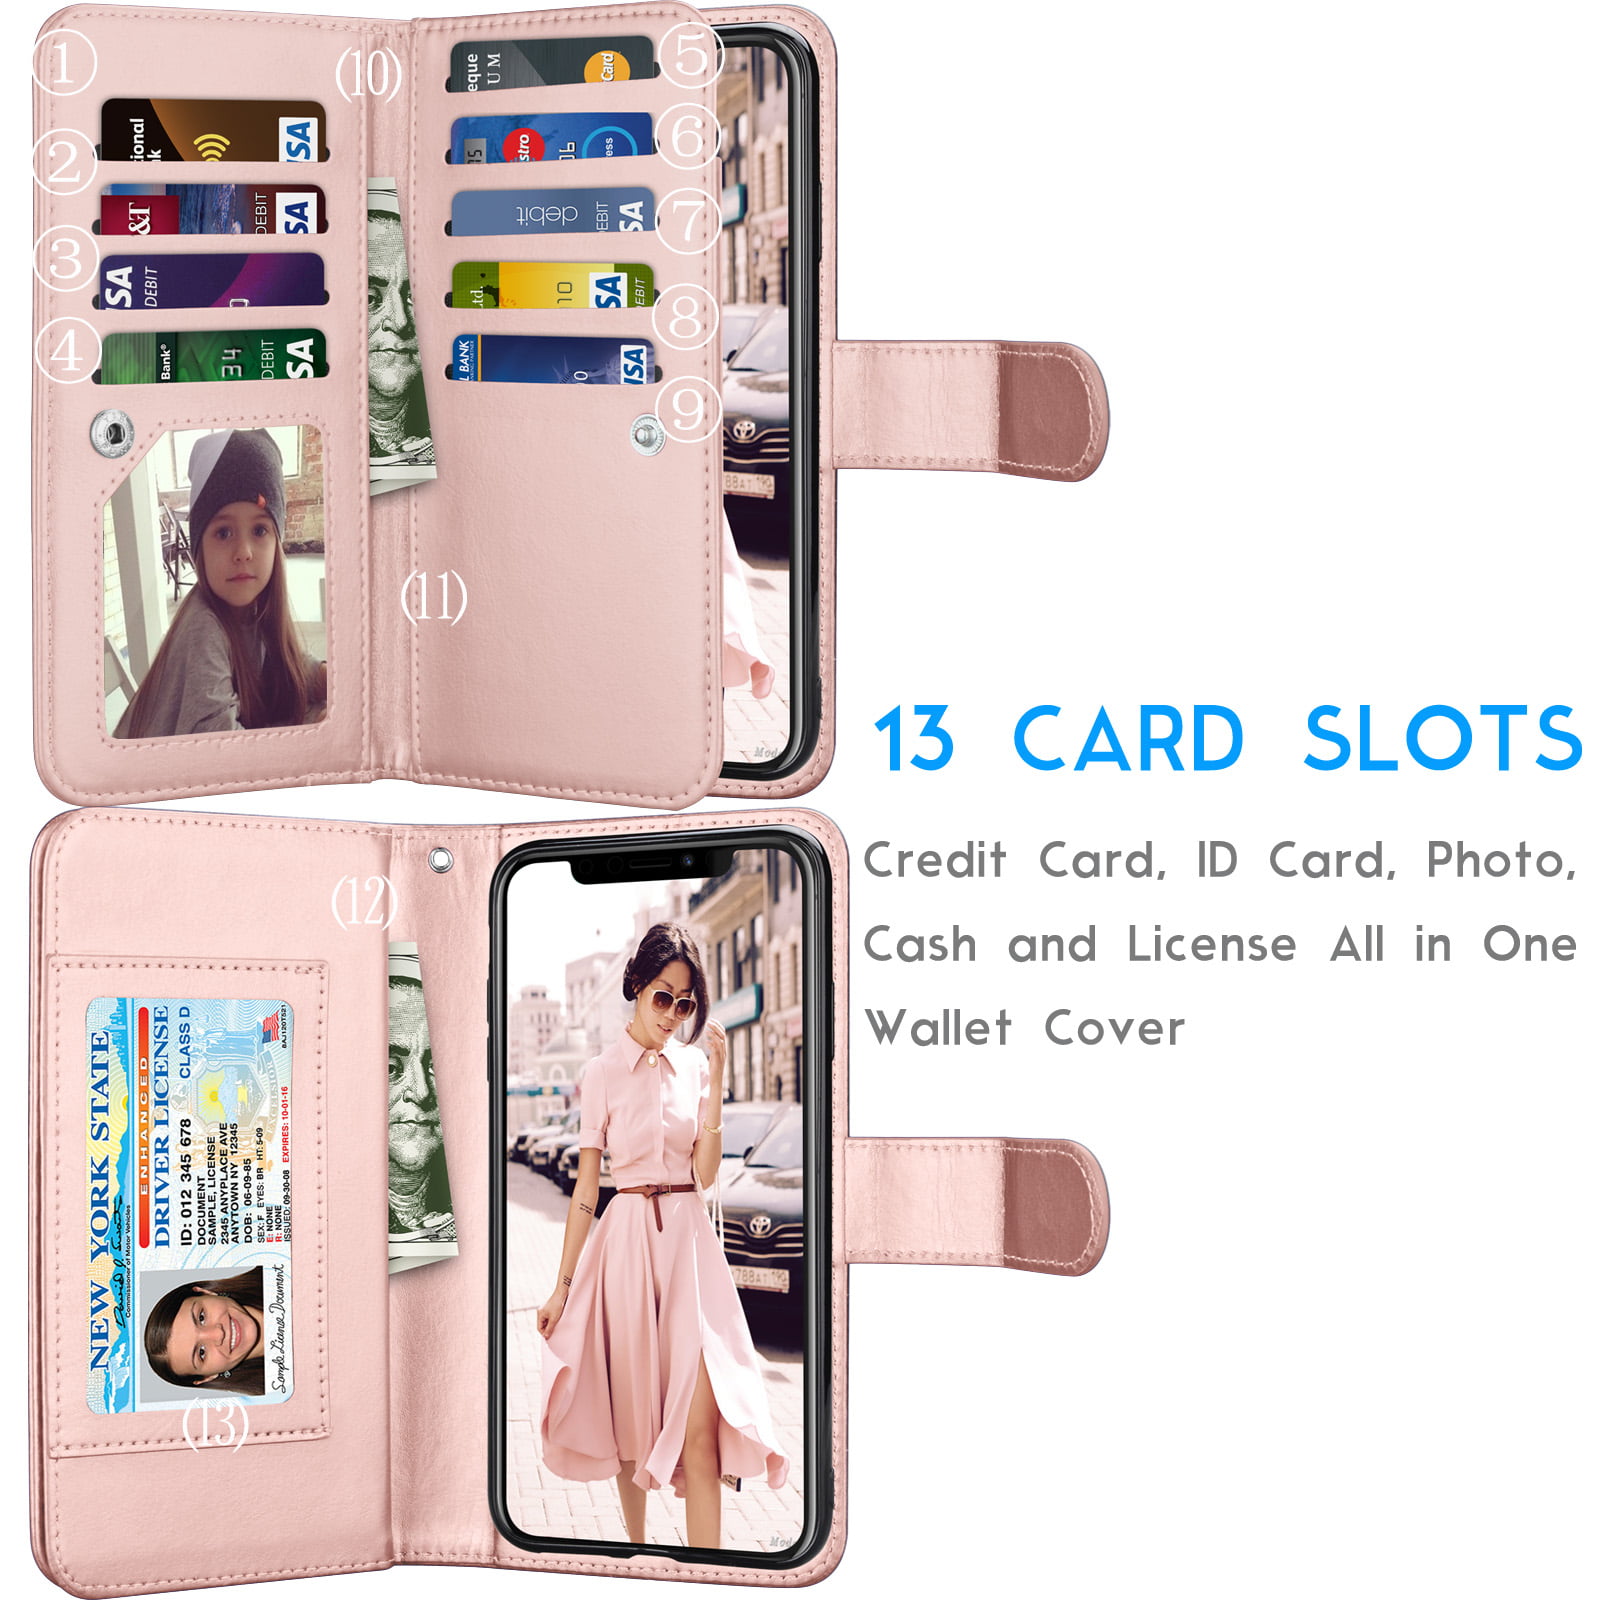 iPhone XS Max Case Glitter Diamonds Owls Totem Wallet Case PU Leather Magnetic Flip Cover Shock Resistant Soft TPU Slim Protective Bumper with Card Slots Kickstand Lanyard for iPhone XS Max Rose Gold 